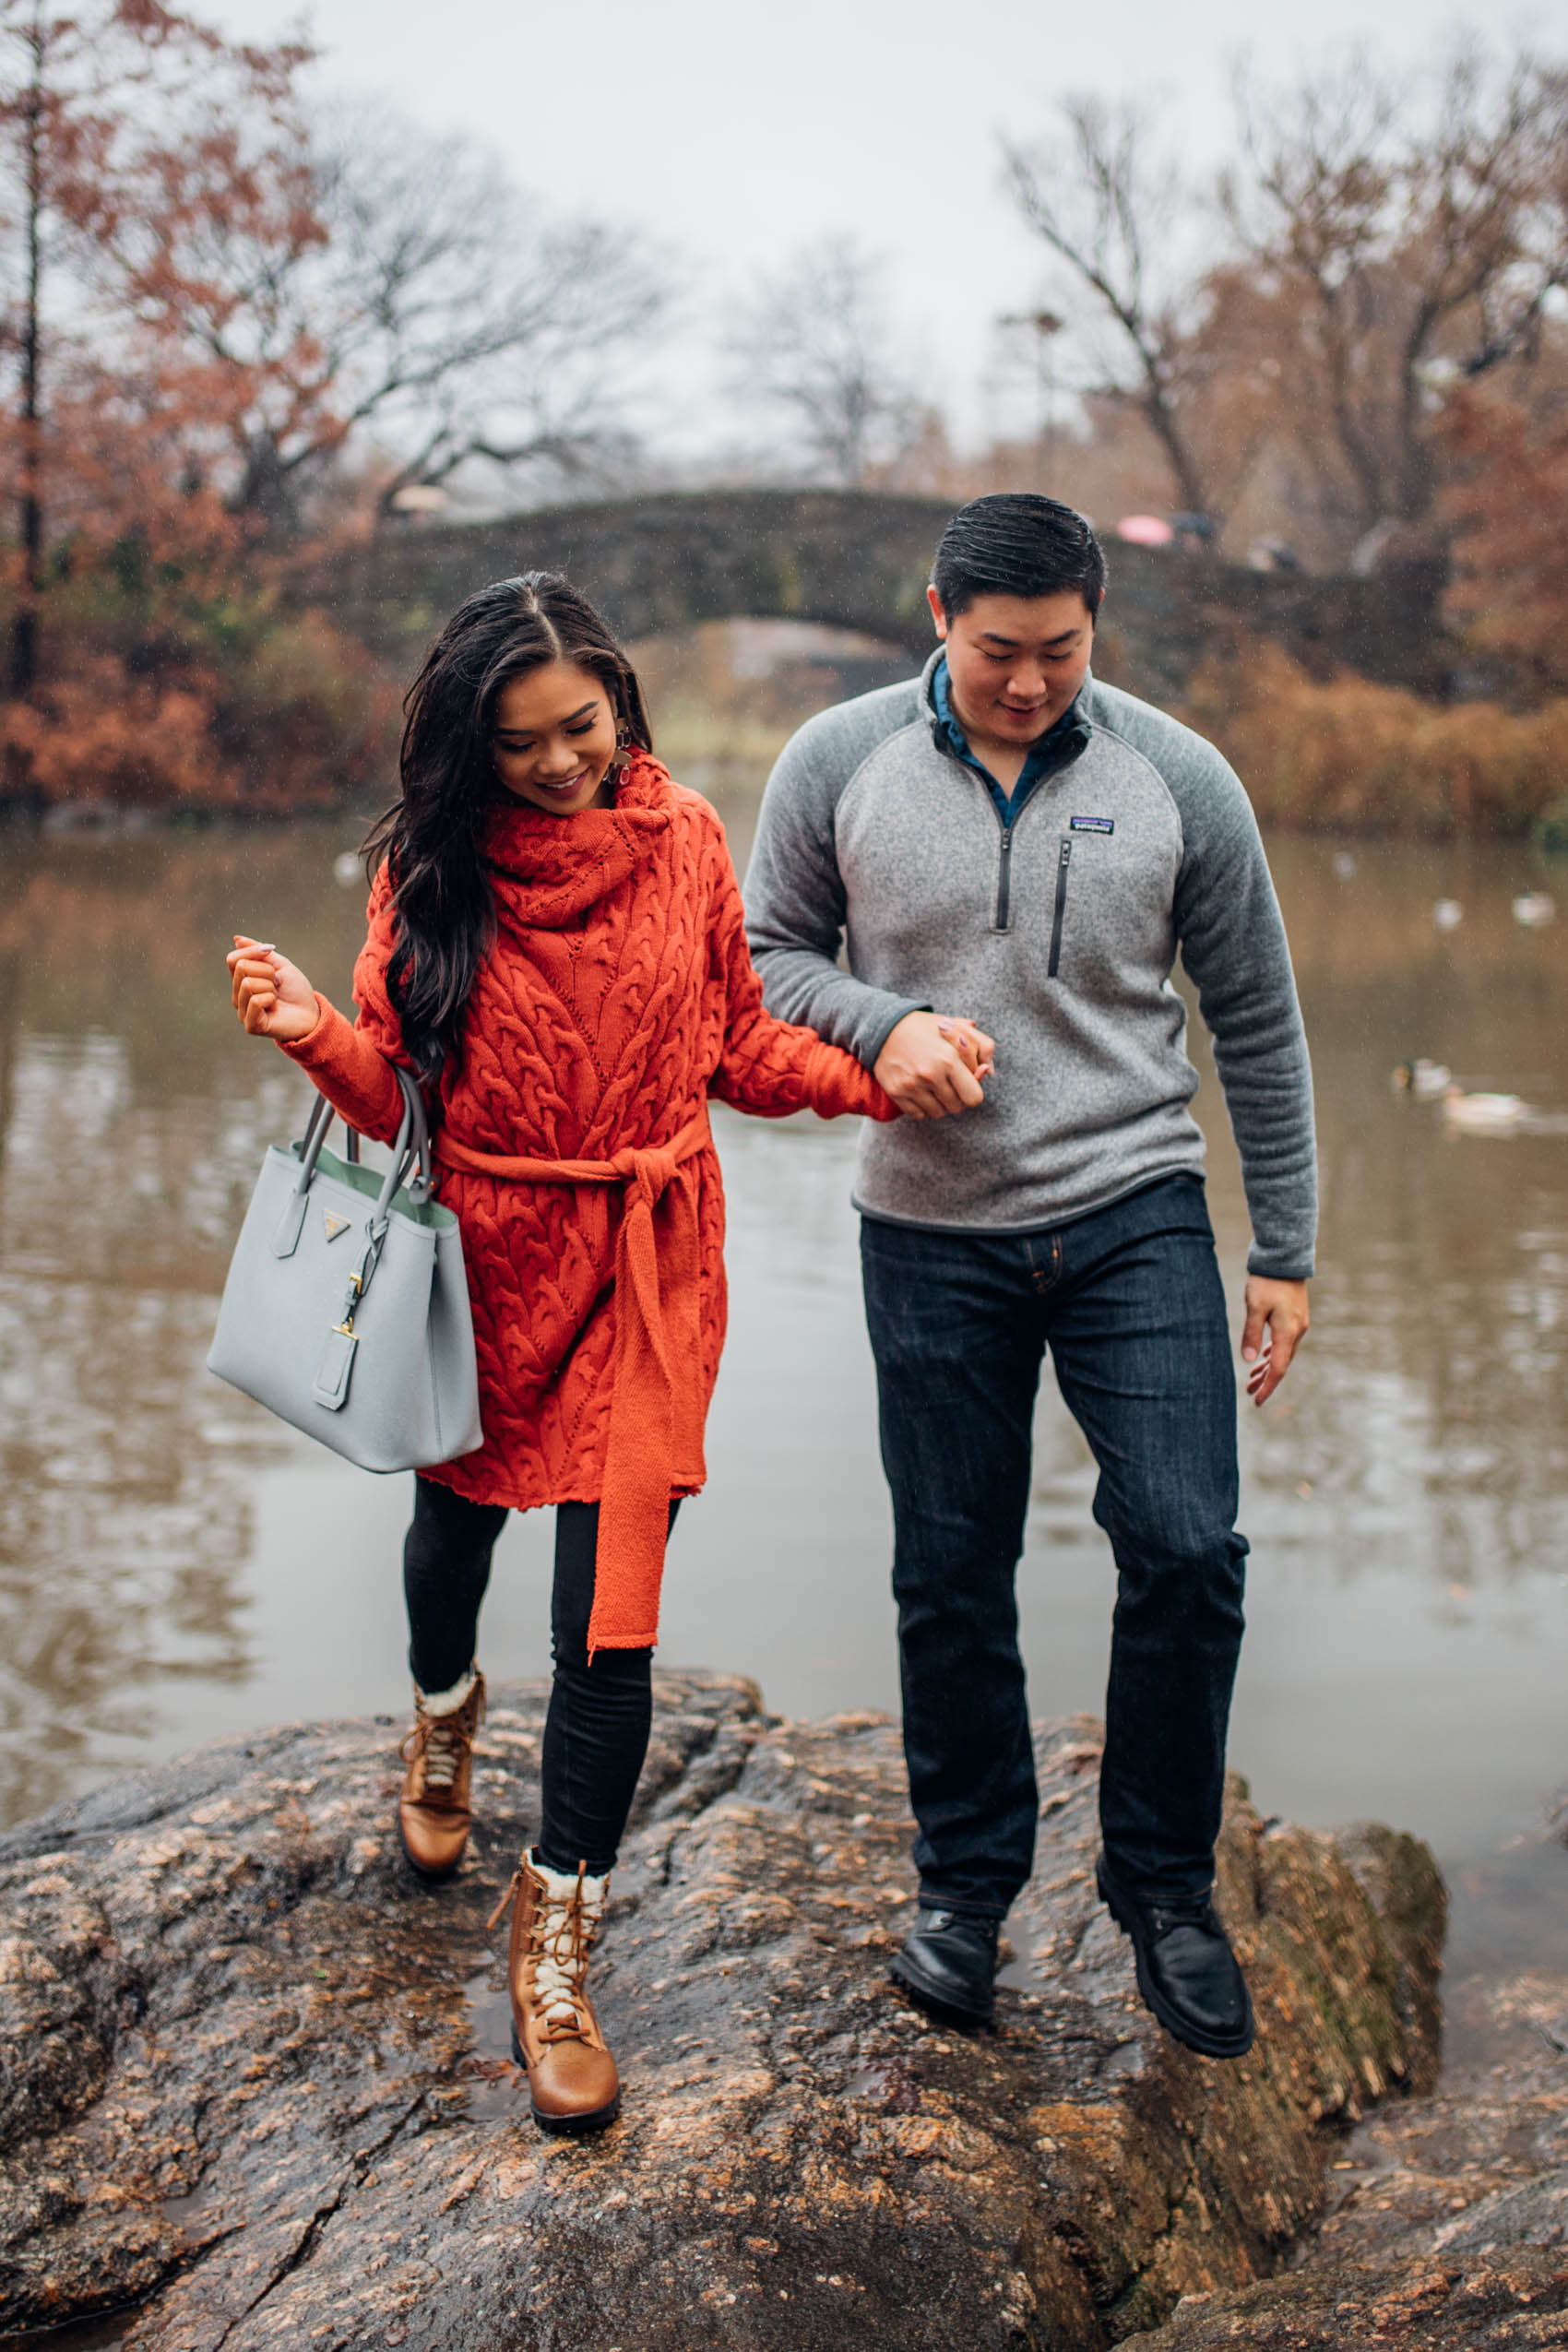 Blogger Hoang-Kim wears a red sweater dress with warm leggings and boots at Central Park during winter. Jonathan wears a Patagonia Better Sweater